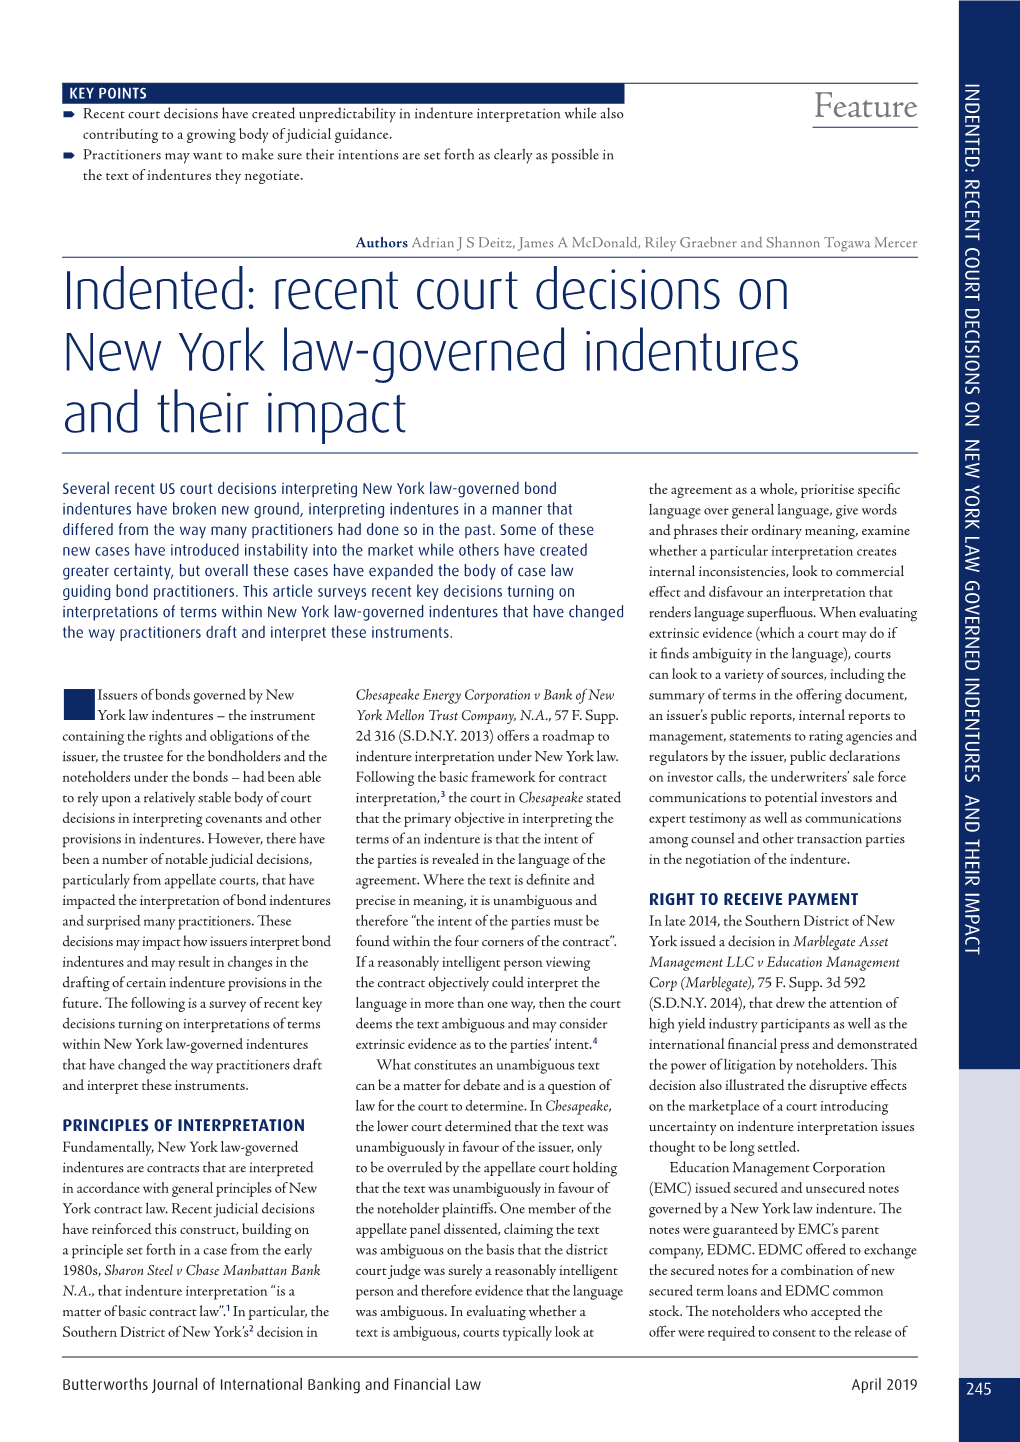 Recent Court Decisions on New York Law-Governed Indentures and Their Impact